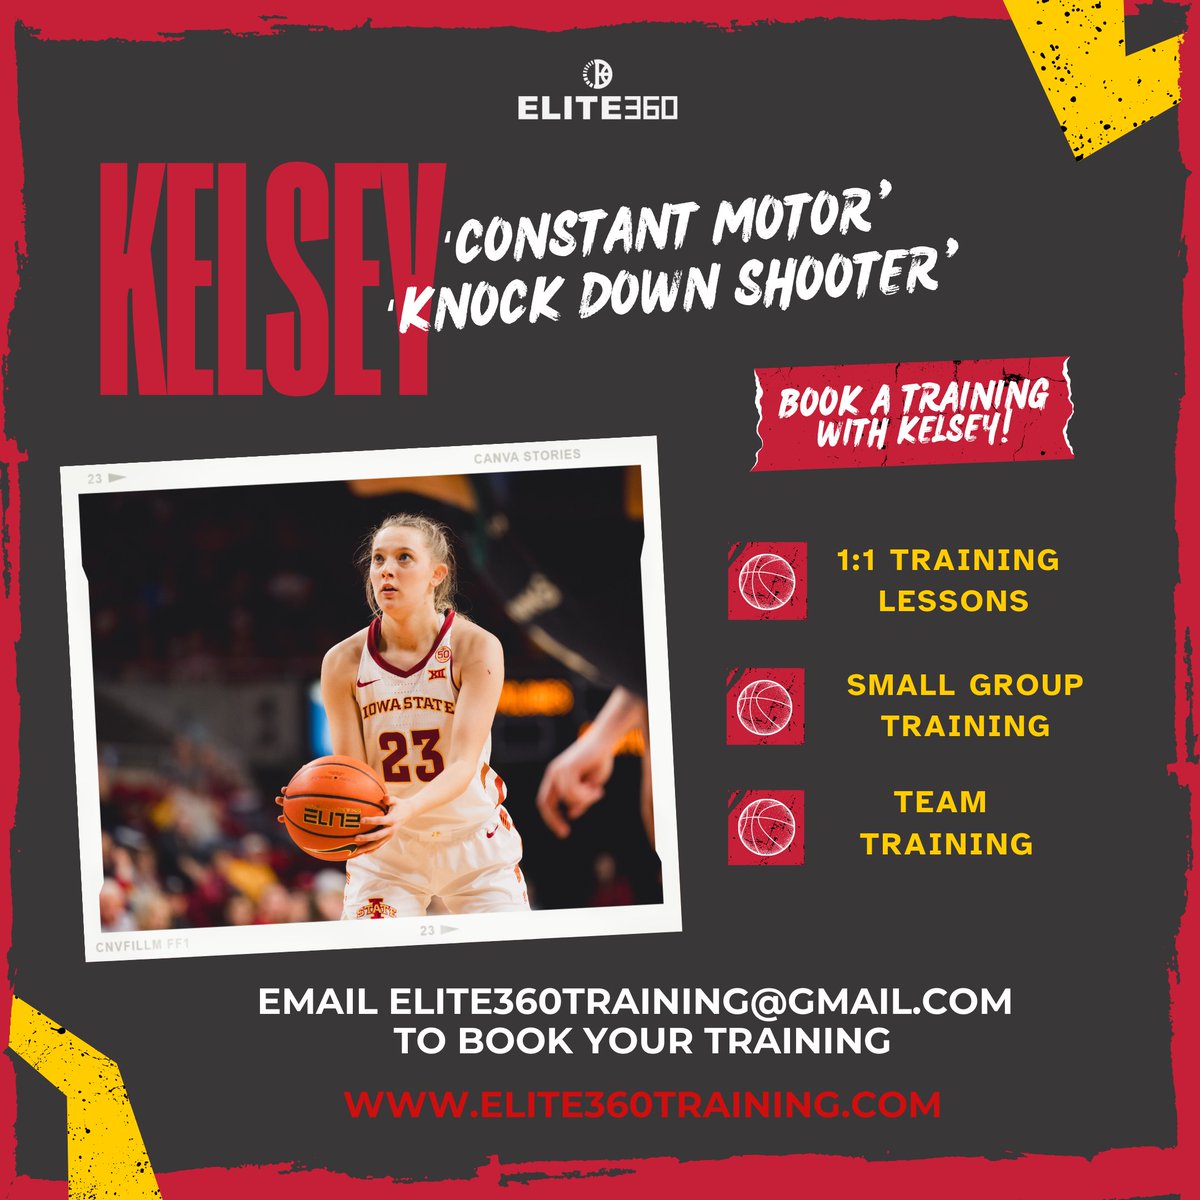 Excited to announce our new teammates & trainers.🏀 Contact us today to book a lesson with your favorite player! Email elite360training@gmail.com elite360training.com